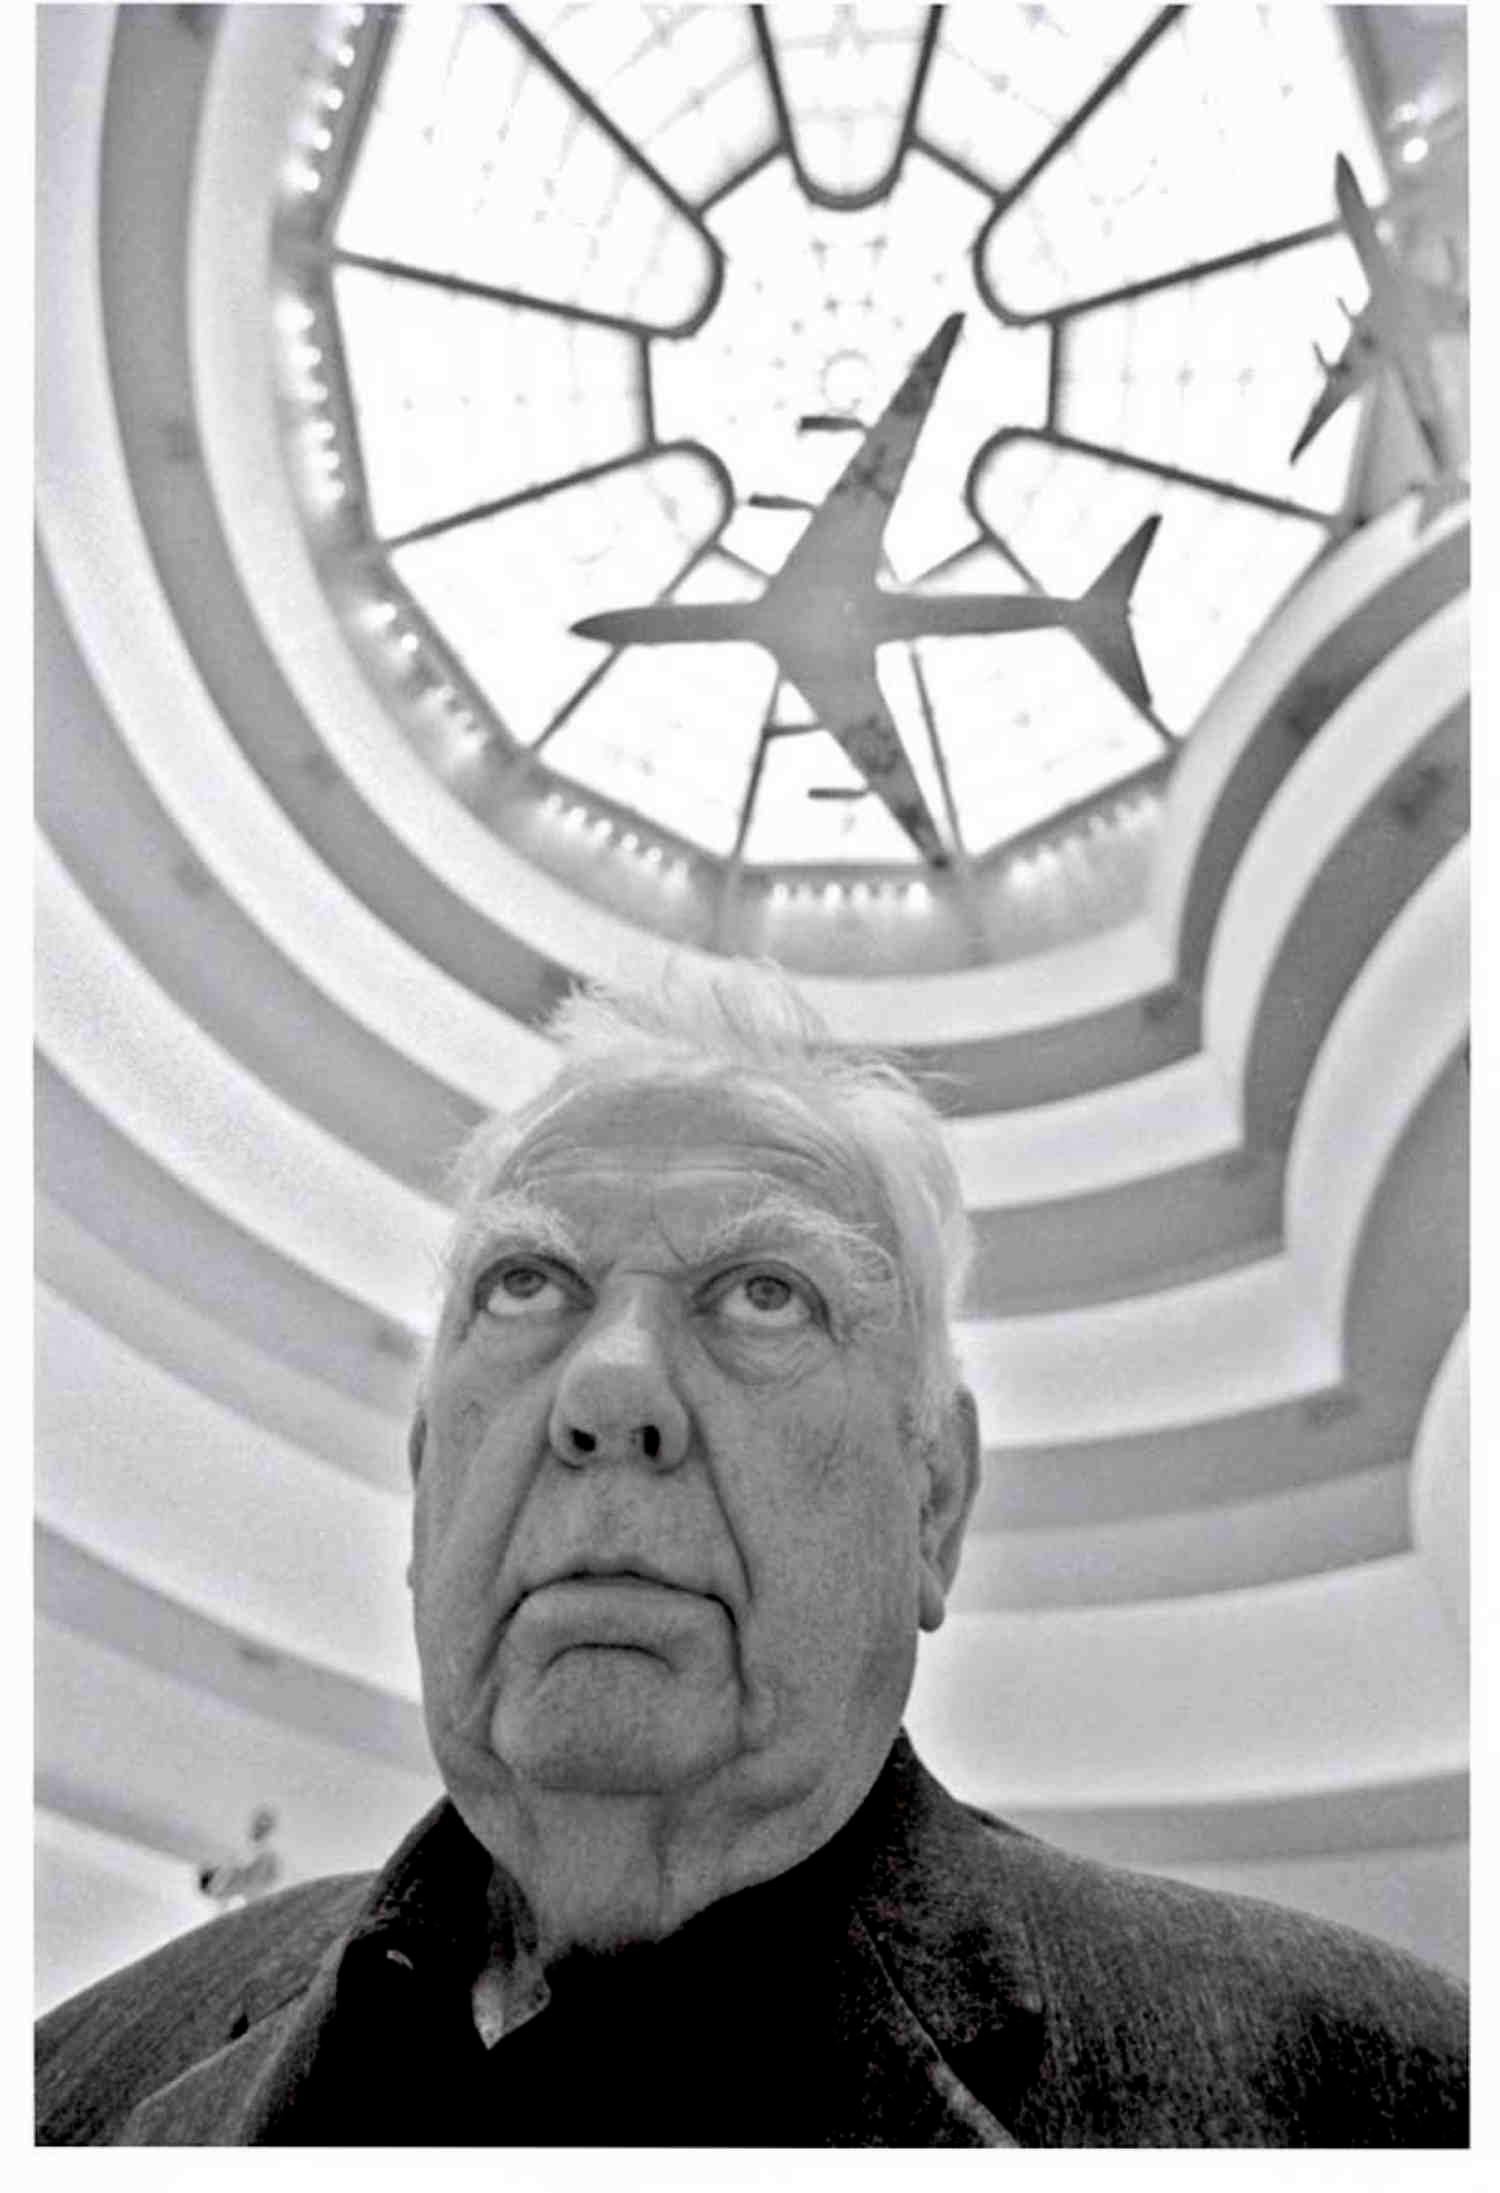 Jack Mitchell Black and White Photograph - Artist Alexander Calder in the Guggenheim gazing up at his painted jet aircraft 